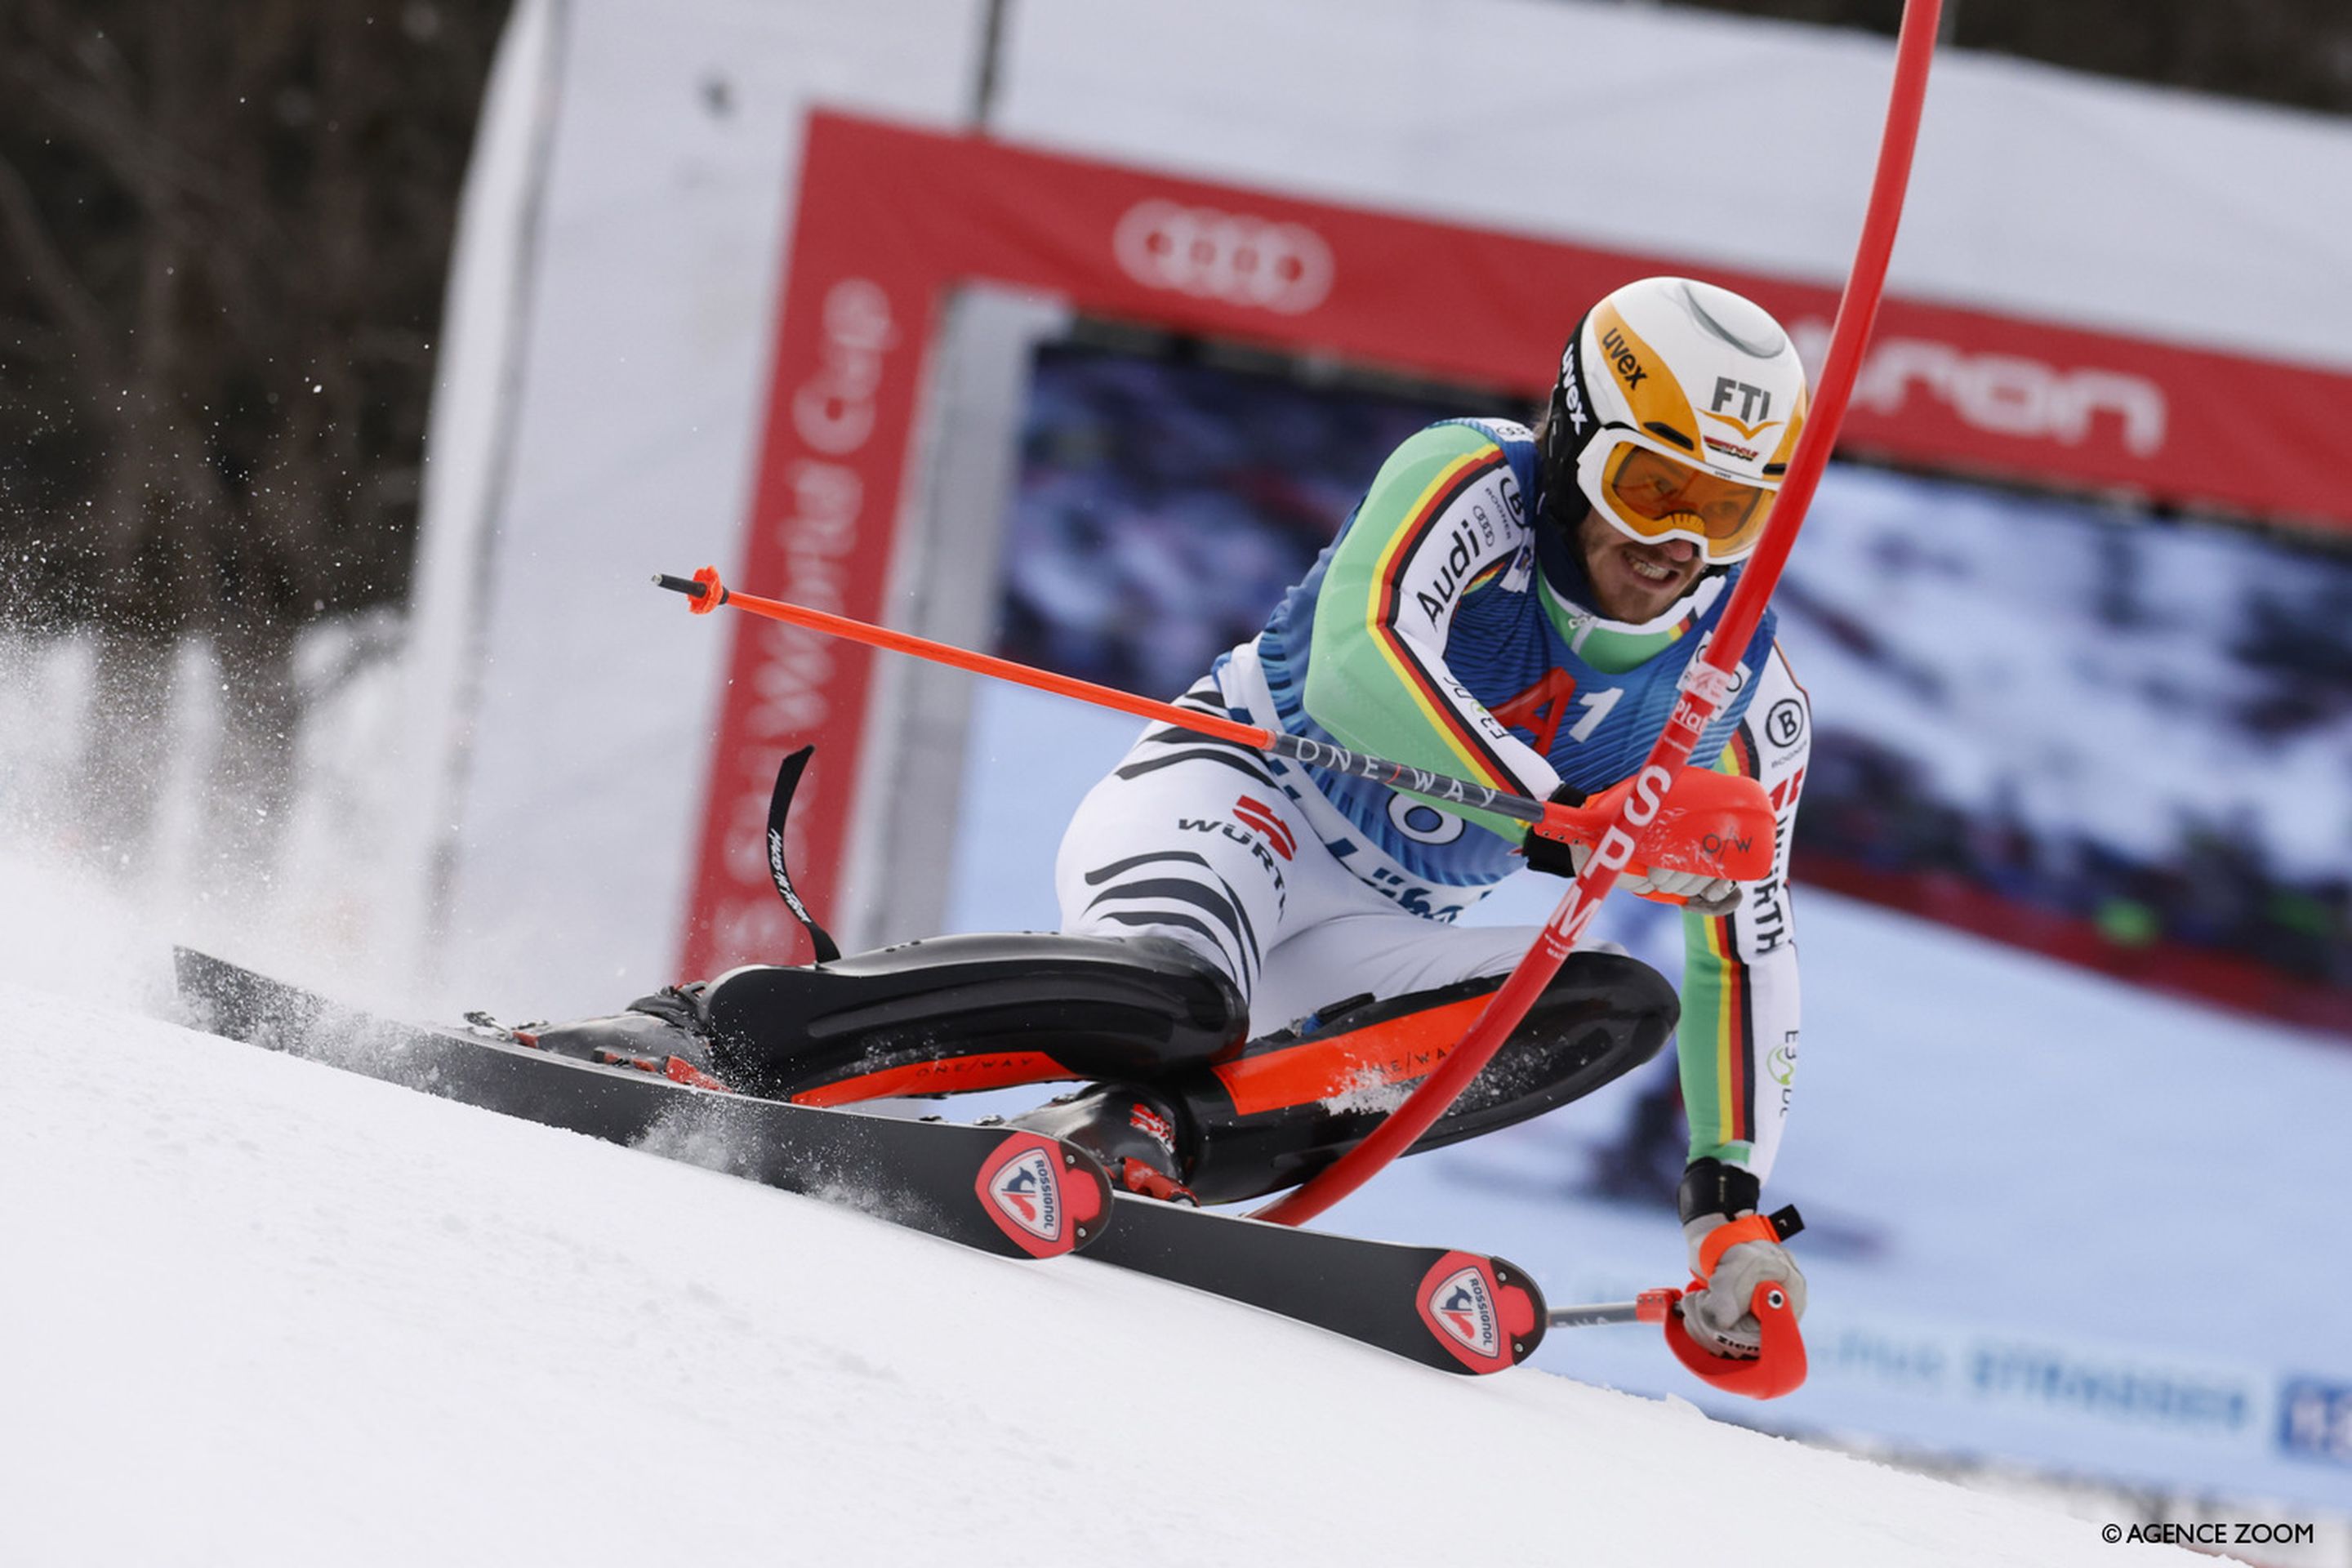 Strasser charges down the Ganslern piste with vigour en route to victory (Agence Zoom)